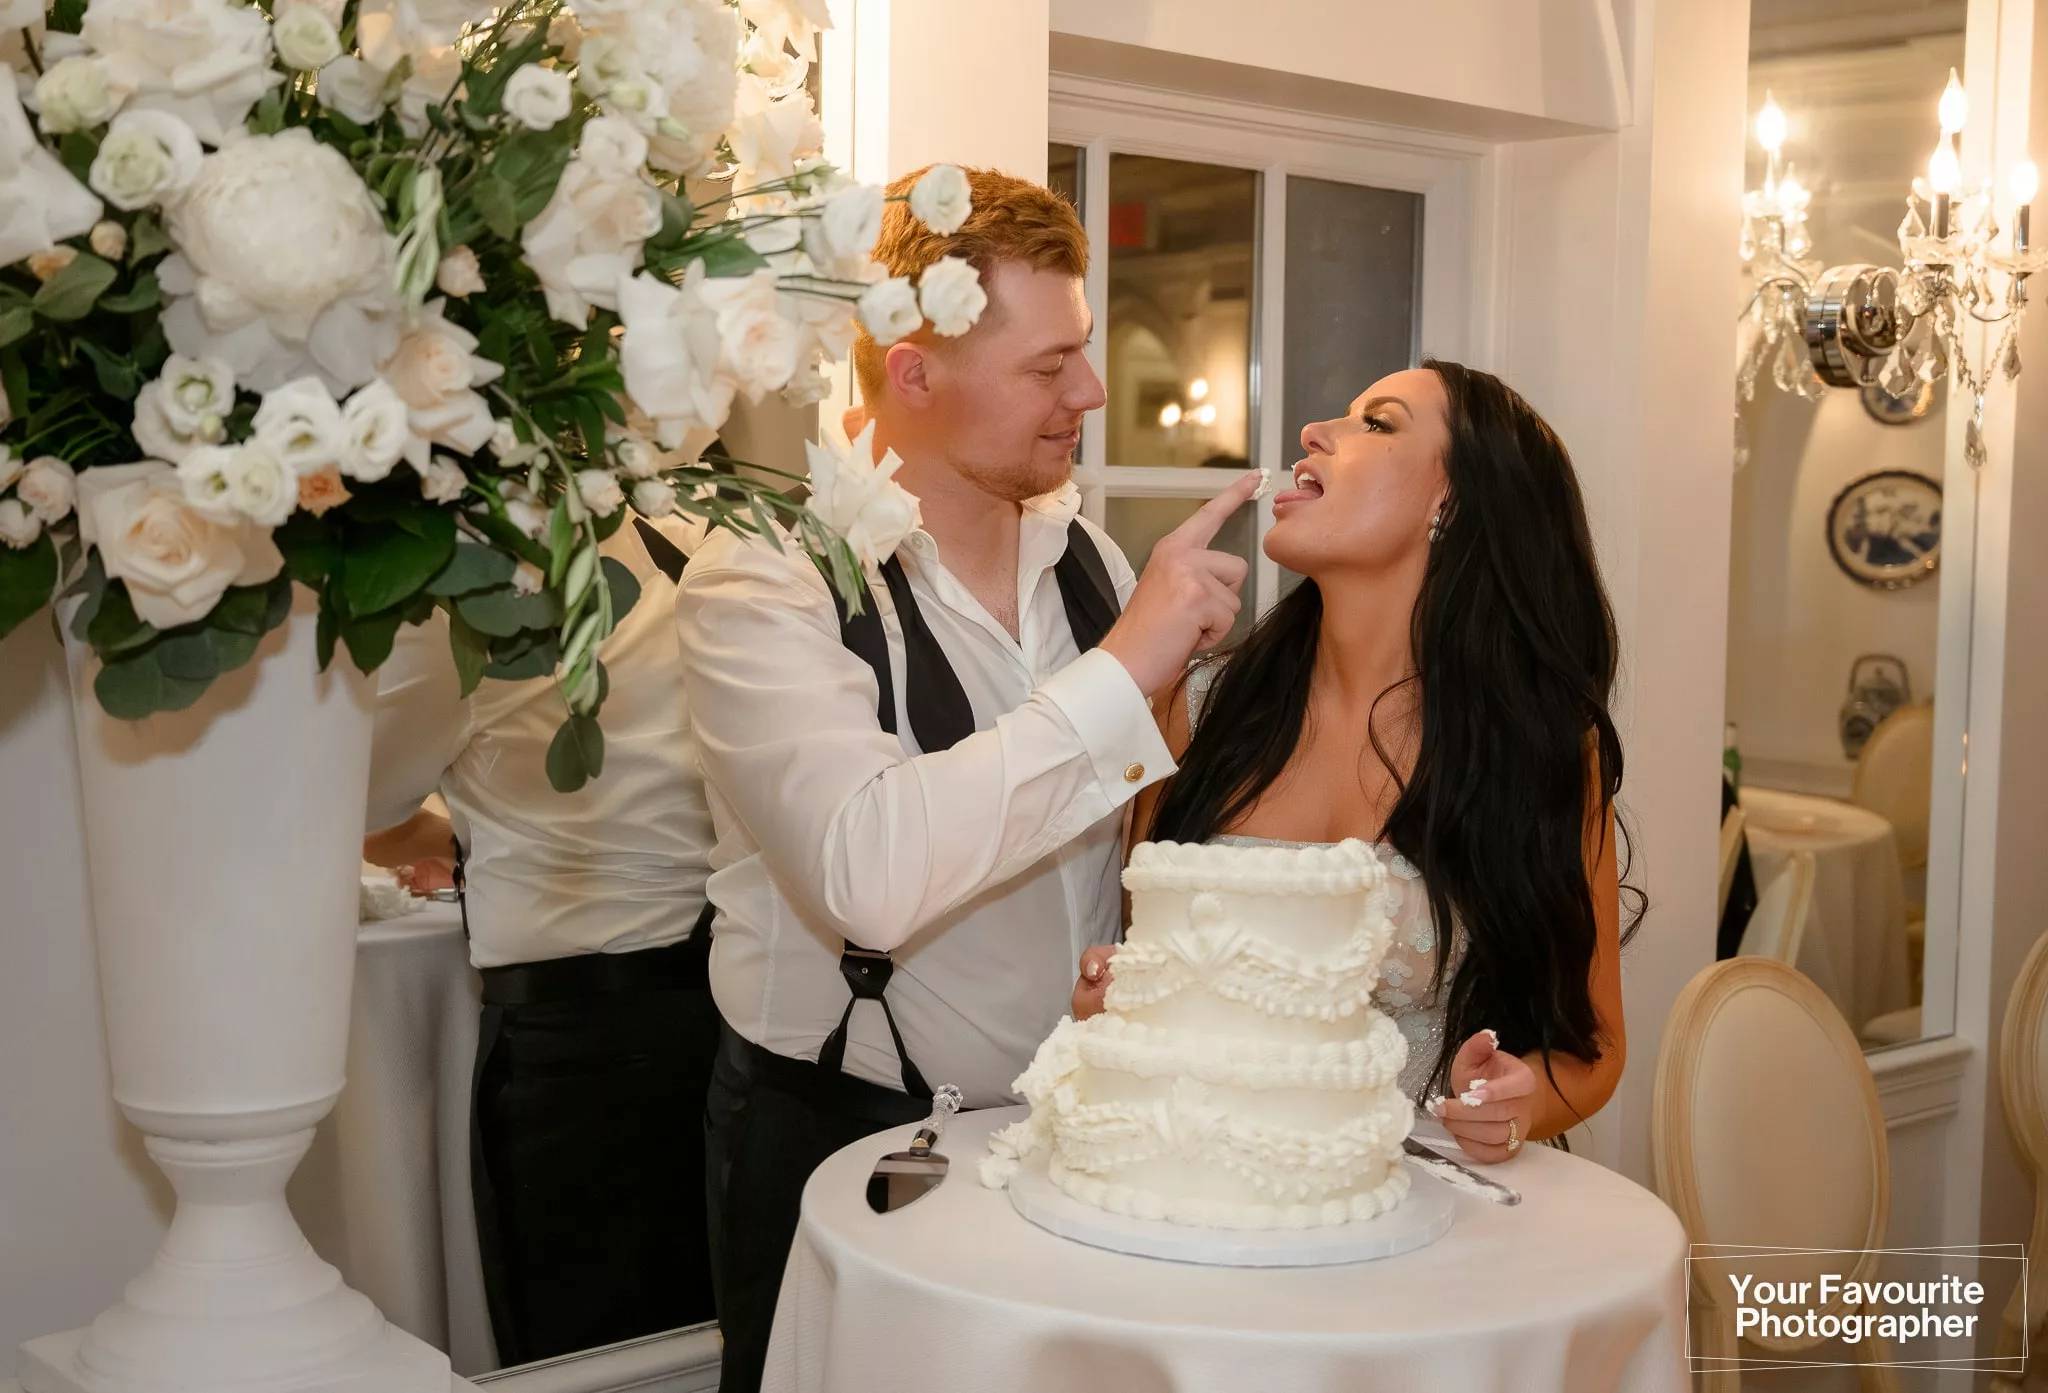 Bride and groom cutting their cake on their wedding day